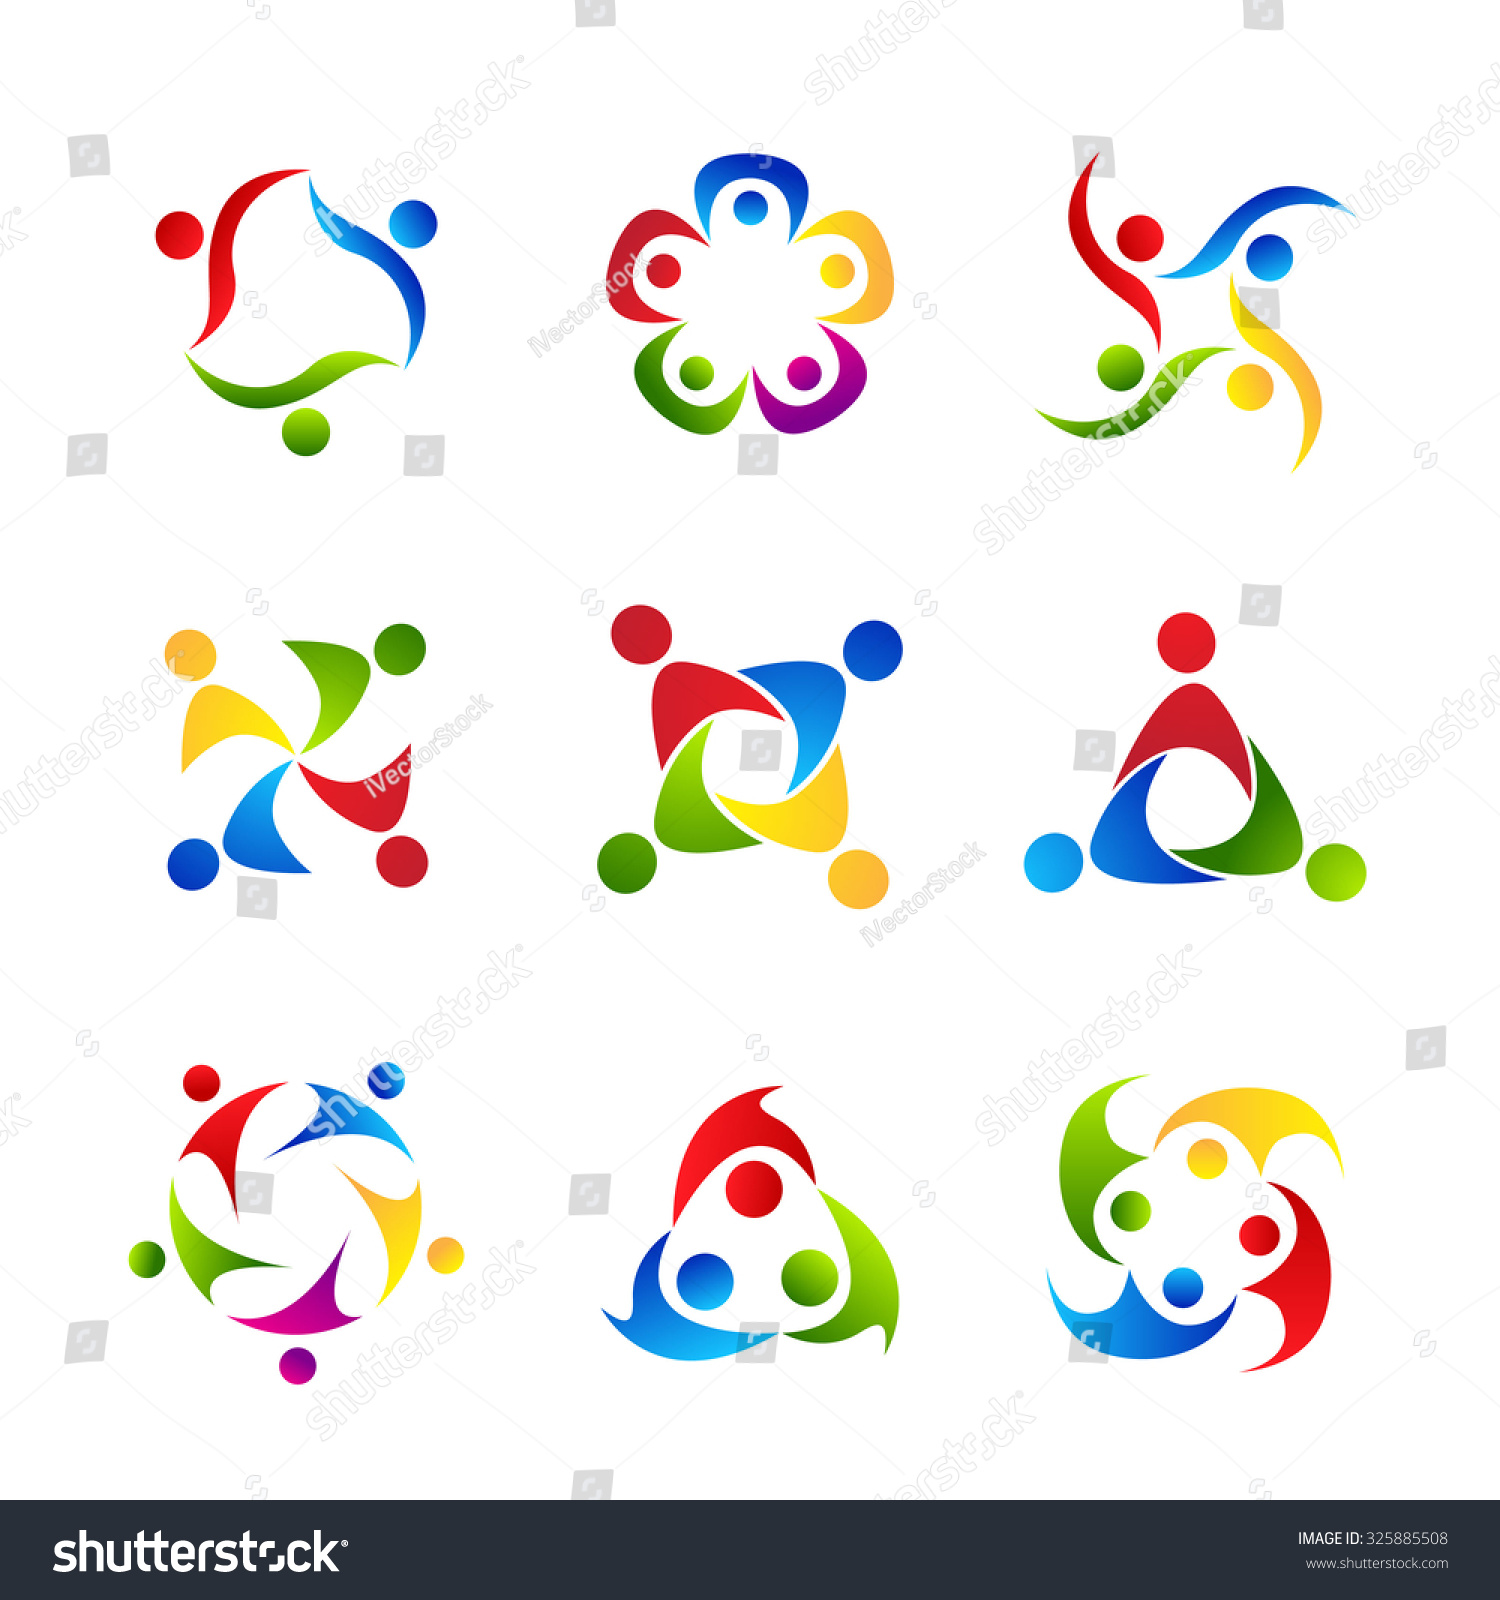 People Collaboration Logo Set Colorful Vector Stock Vector (Royalty ...